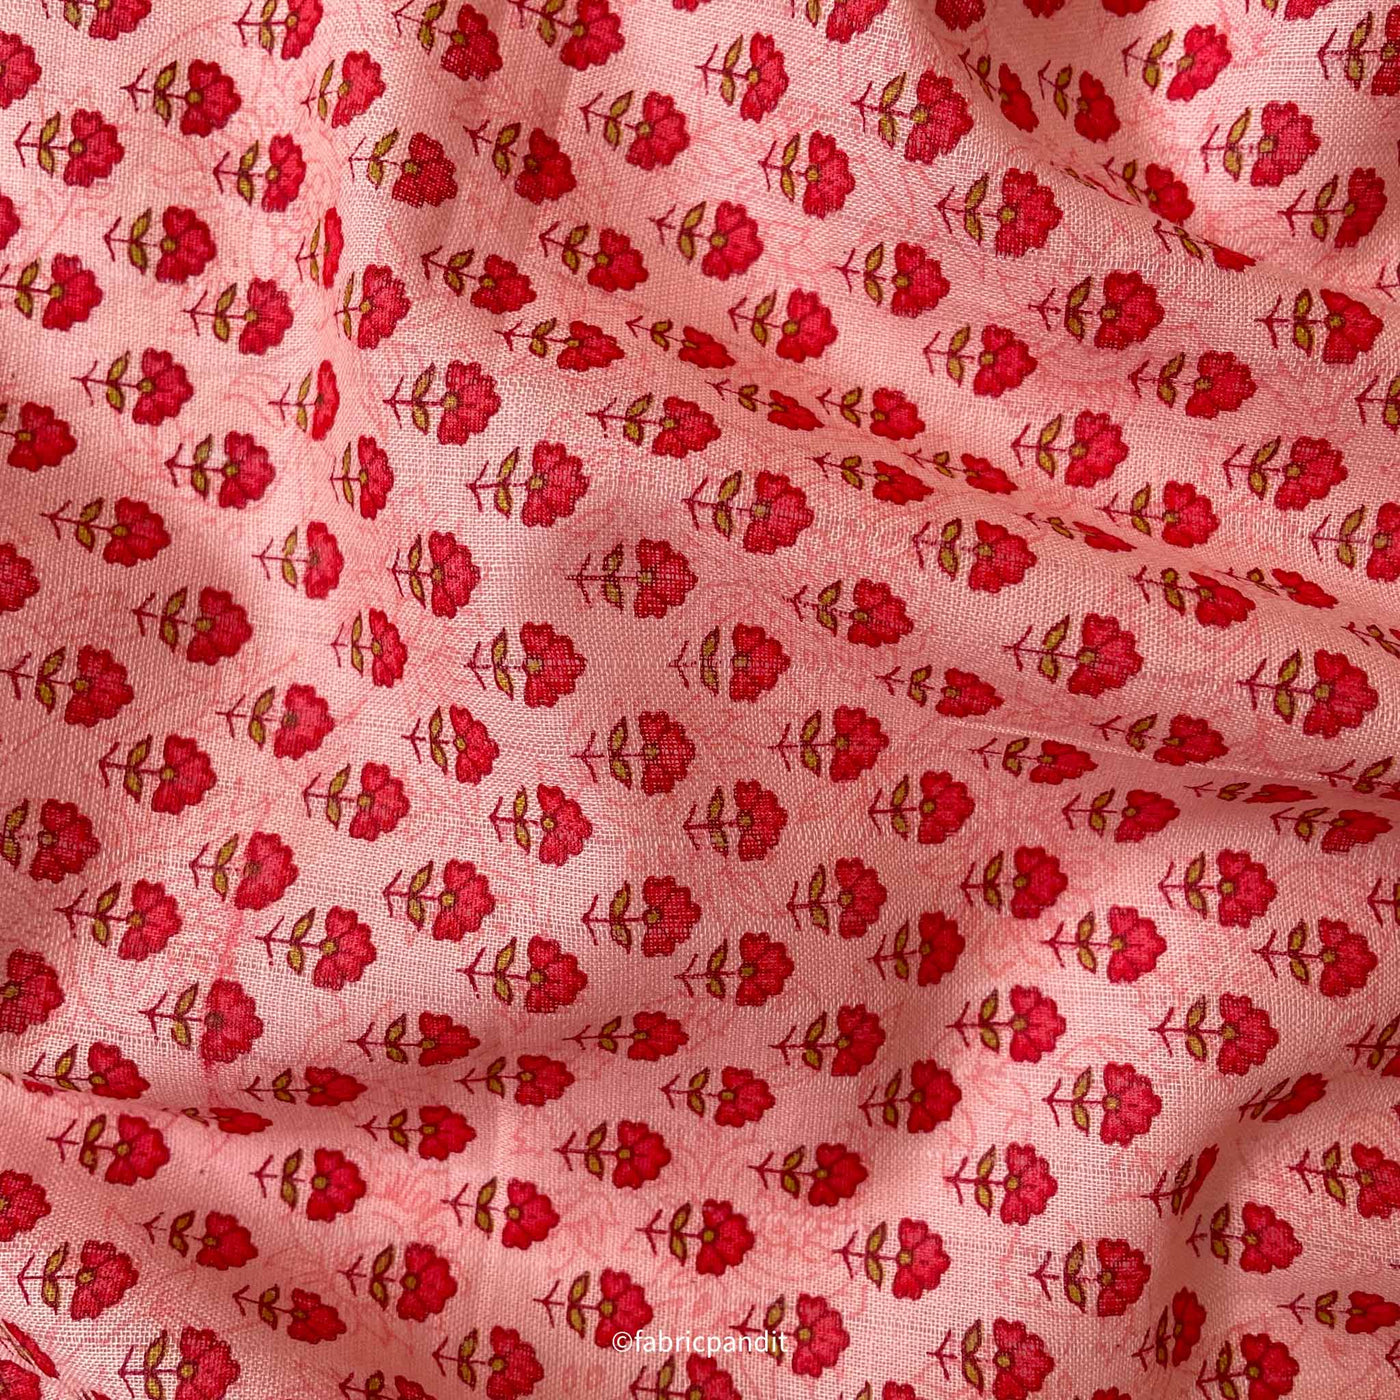 Hand Block Printed Cotton Fabric Cut Piece (CUT PIECE) Soft Peach and Red Mini Marigolds Hand Block Printed Pure Cotton Denting Fabric (Width 43 Inches)